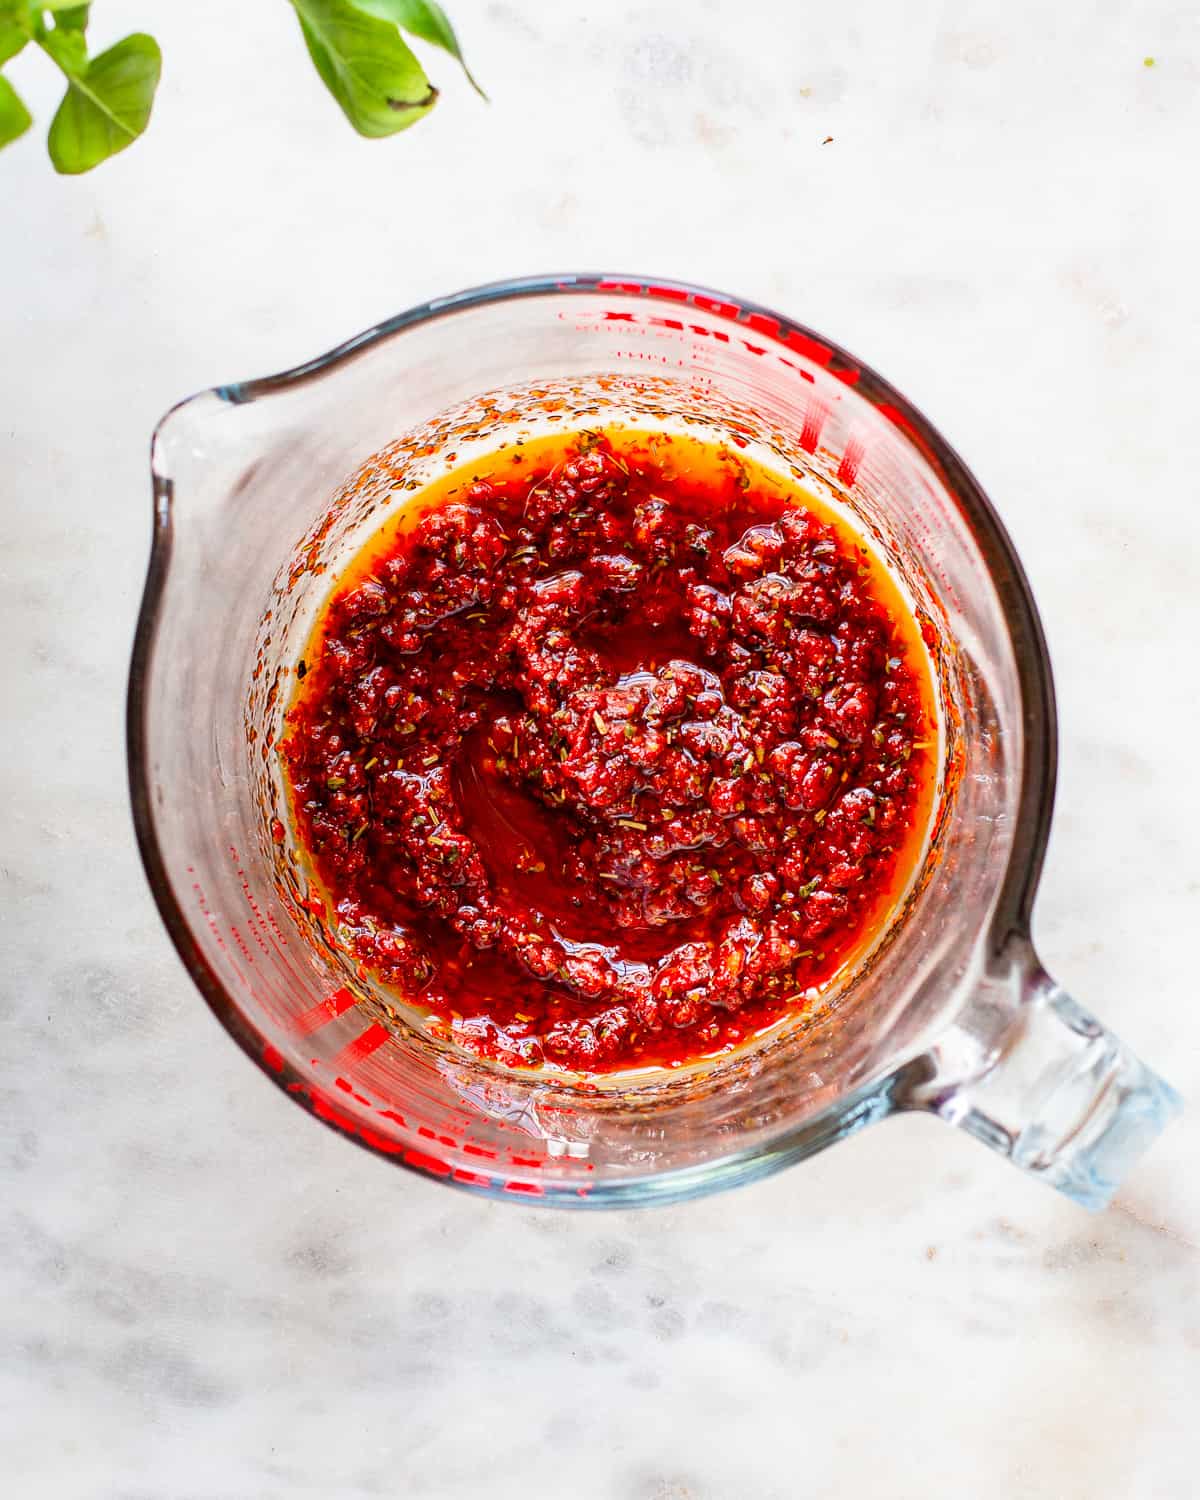 Oily harissa sauce in a glass pitcher.